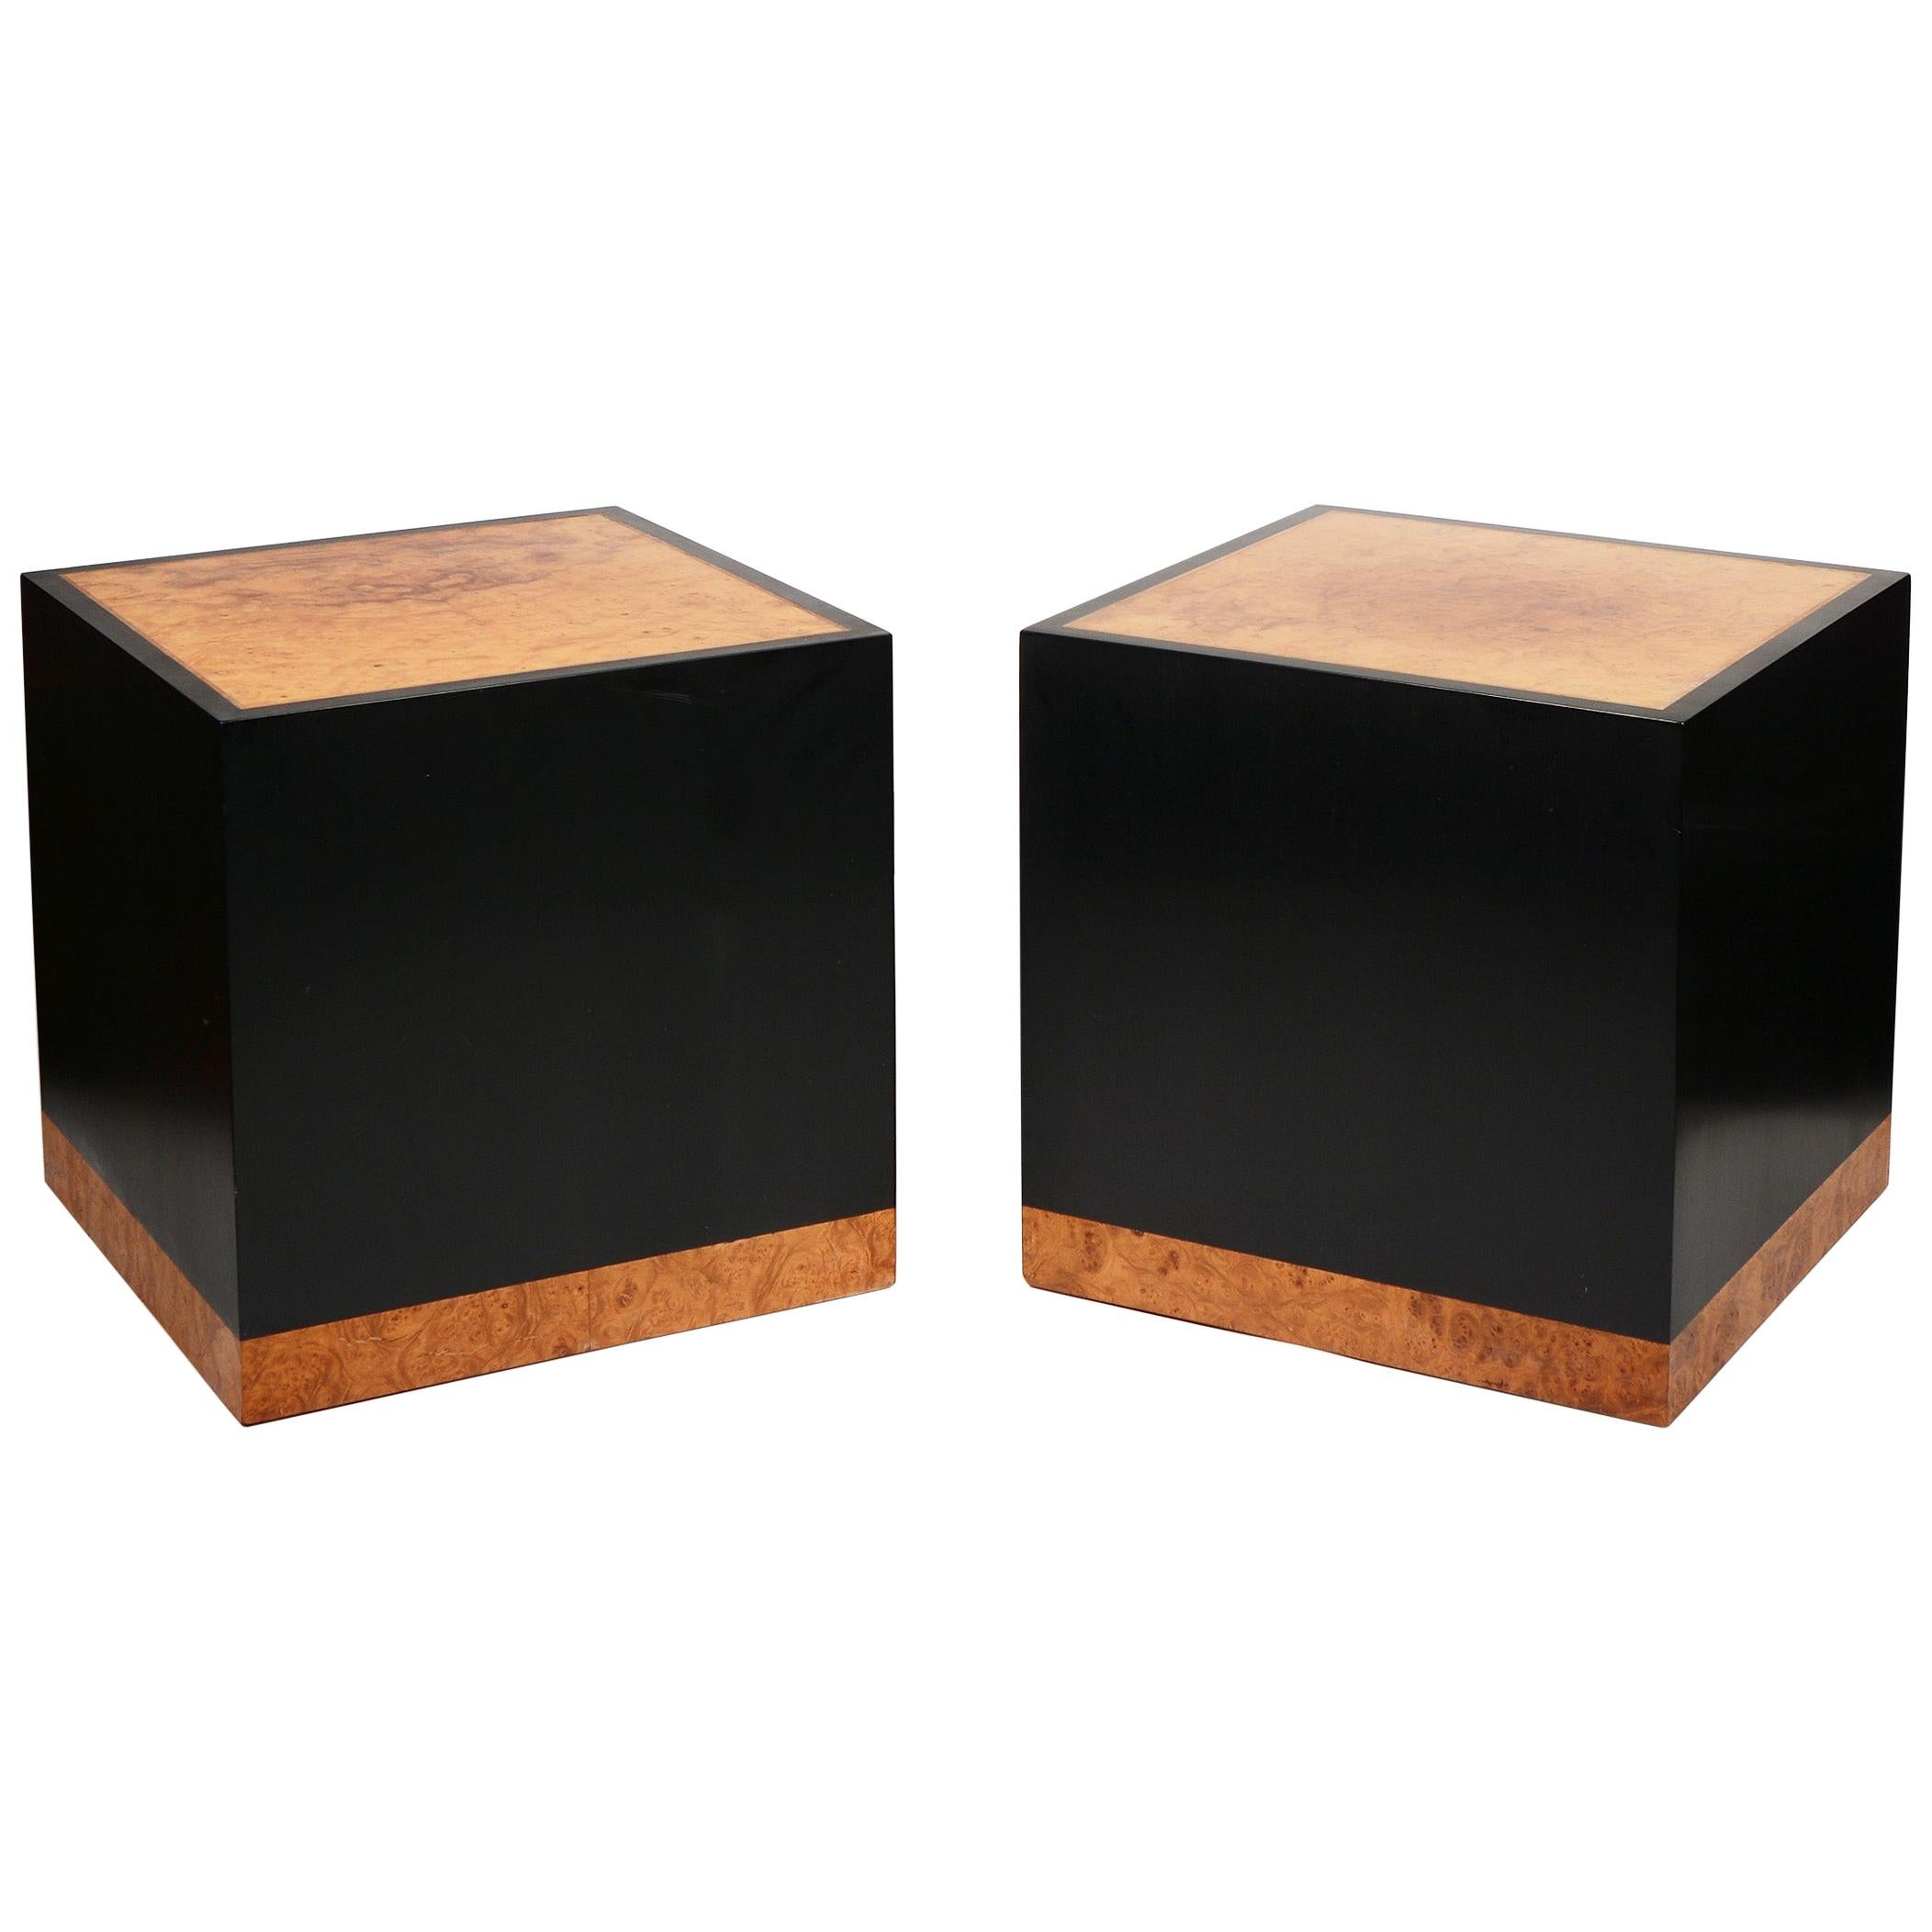 Pair of Birdseye Maple Burl and Resin Cube Side Tables by Edward Wormley For Sale